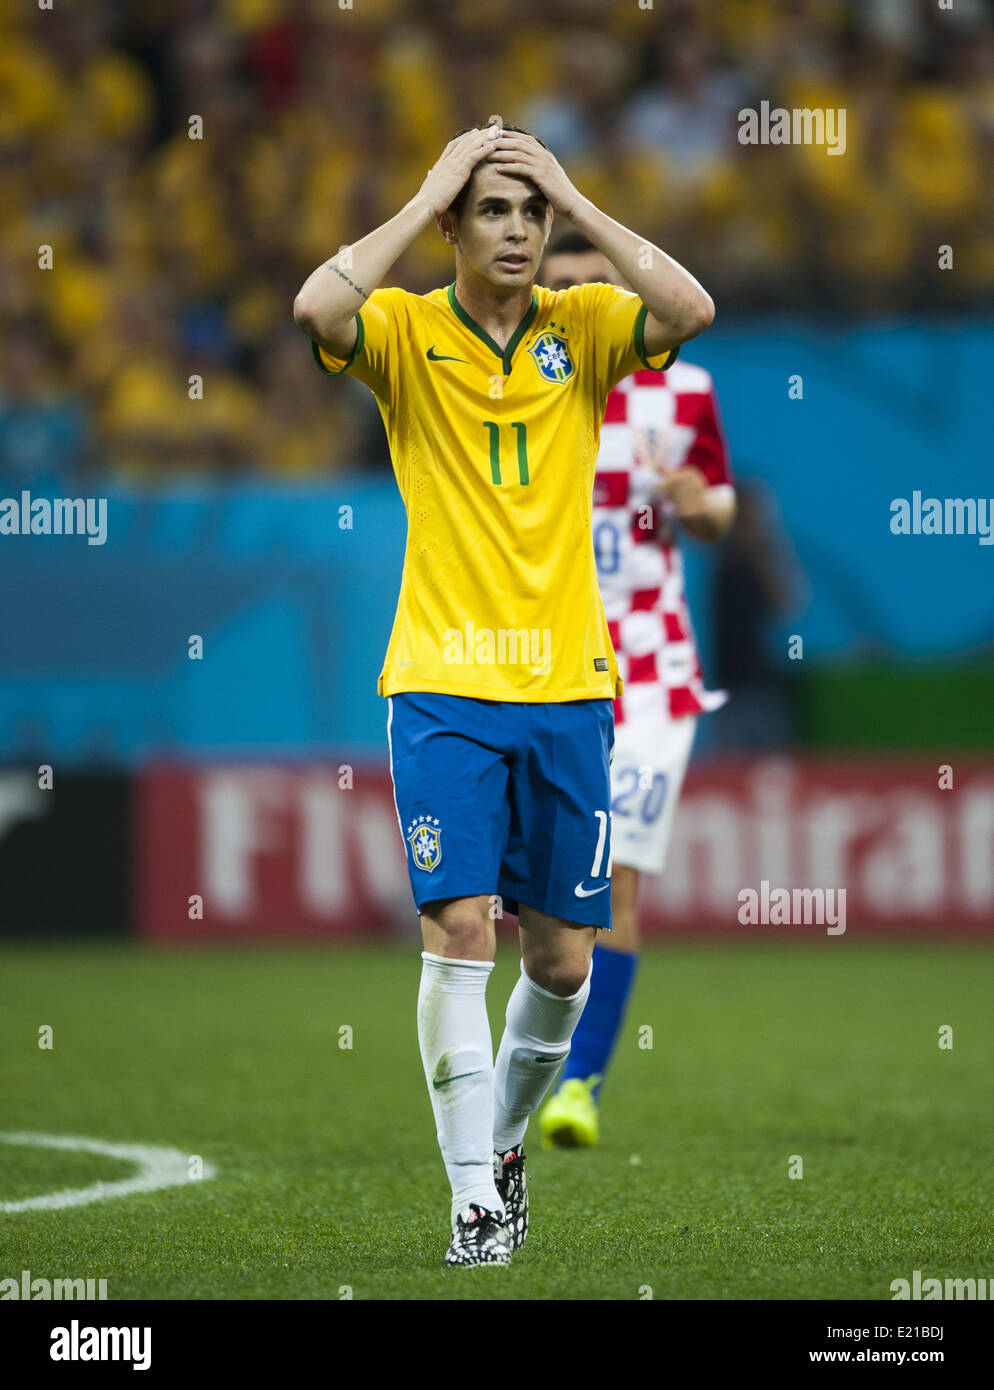 Sao Paulo, Brazil. 12th June, 2014.  Oscar in the match between Brazil and Croatia in the group stage of the 2014 World Cup, for the group A match at the Arena stadium in Sao Paulo on June 12, 2014 Photo:. Urbanandsport/Nurphoto Credit:  Urbanandsport/NurPhoto/ZUMAPRESS.com/Alamy Live News Stock Photo